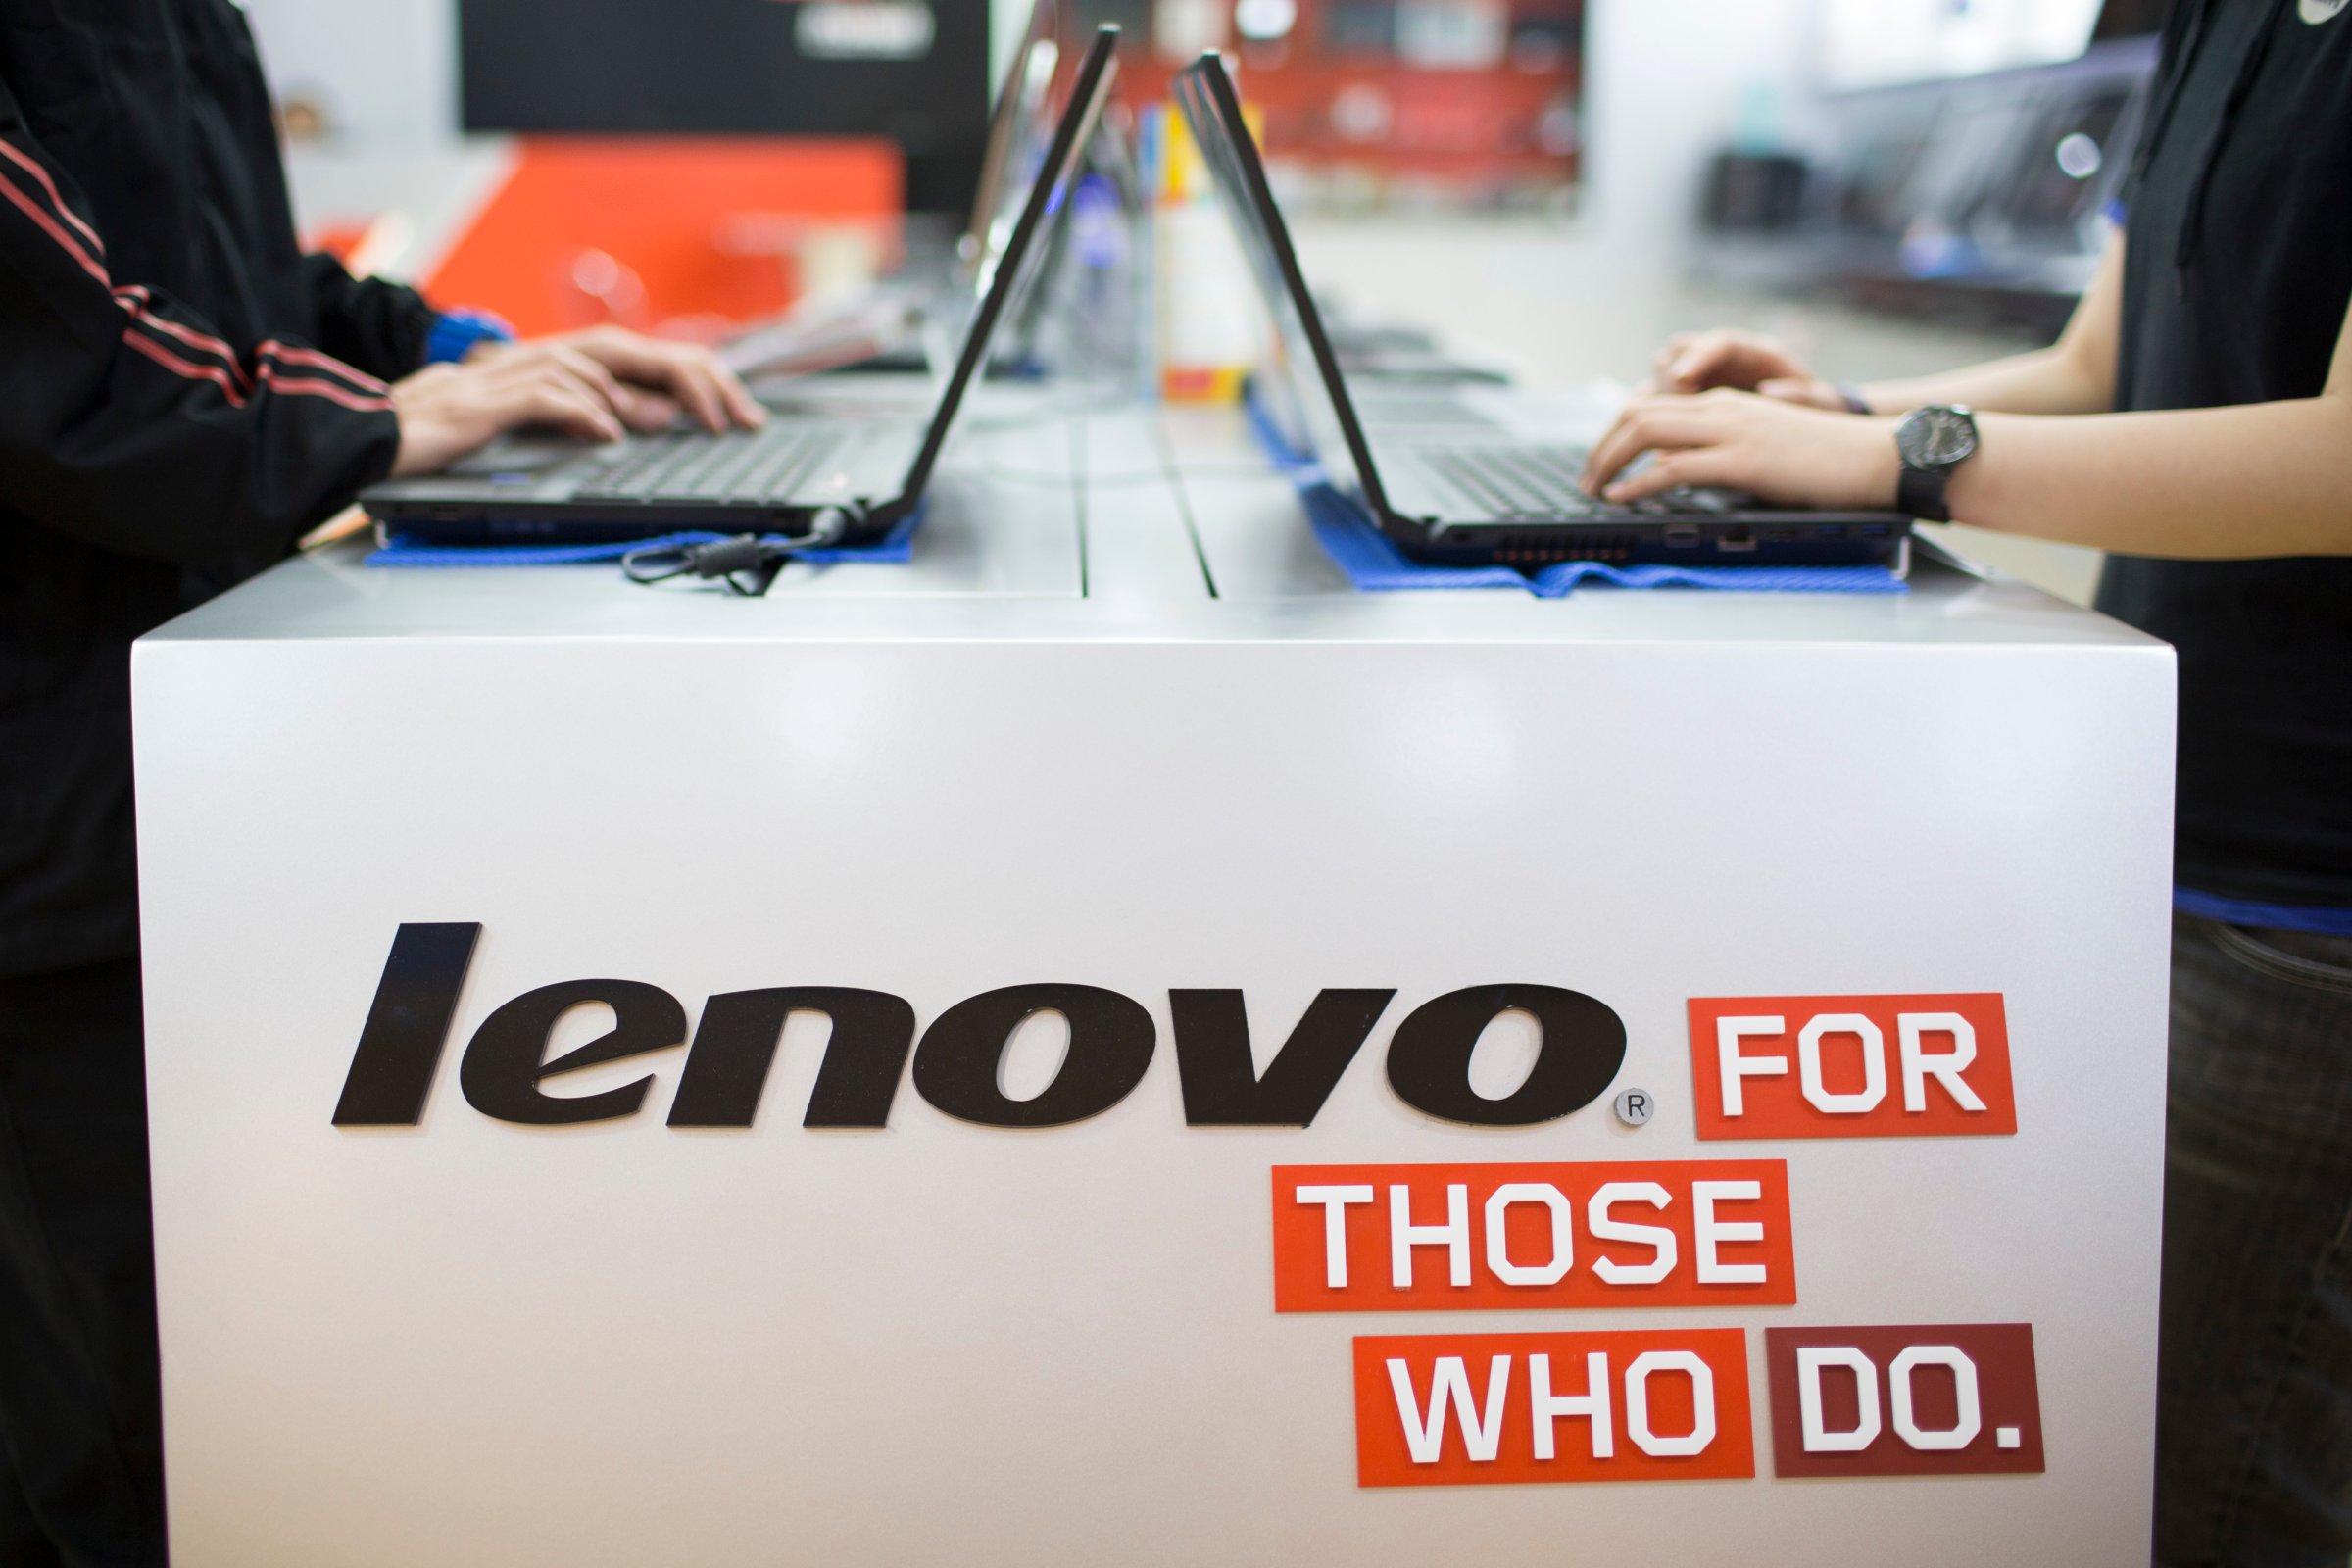 Inside A Lenovo Group Store As Company Reports 25 Percent Jump In Fourth-Quarter Profit